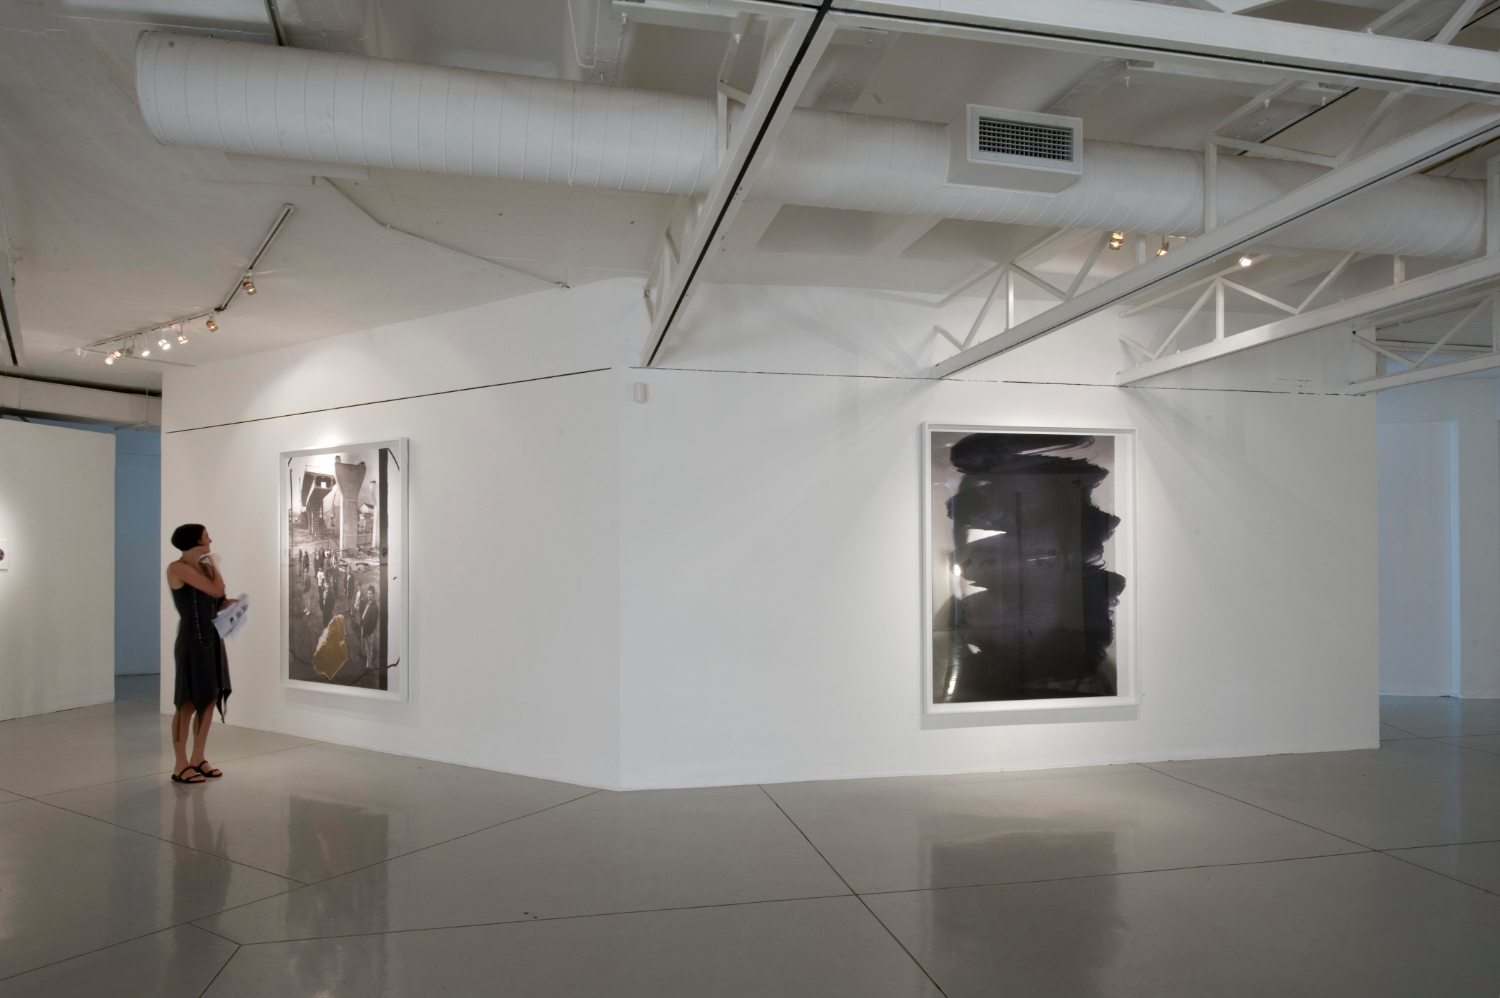 People in Trouble Laughing Pushed to the Ground (Contacts), Installation View, image © Goodman Gallery, 2011 - 3.jpg